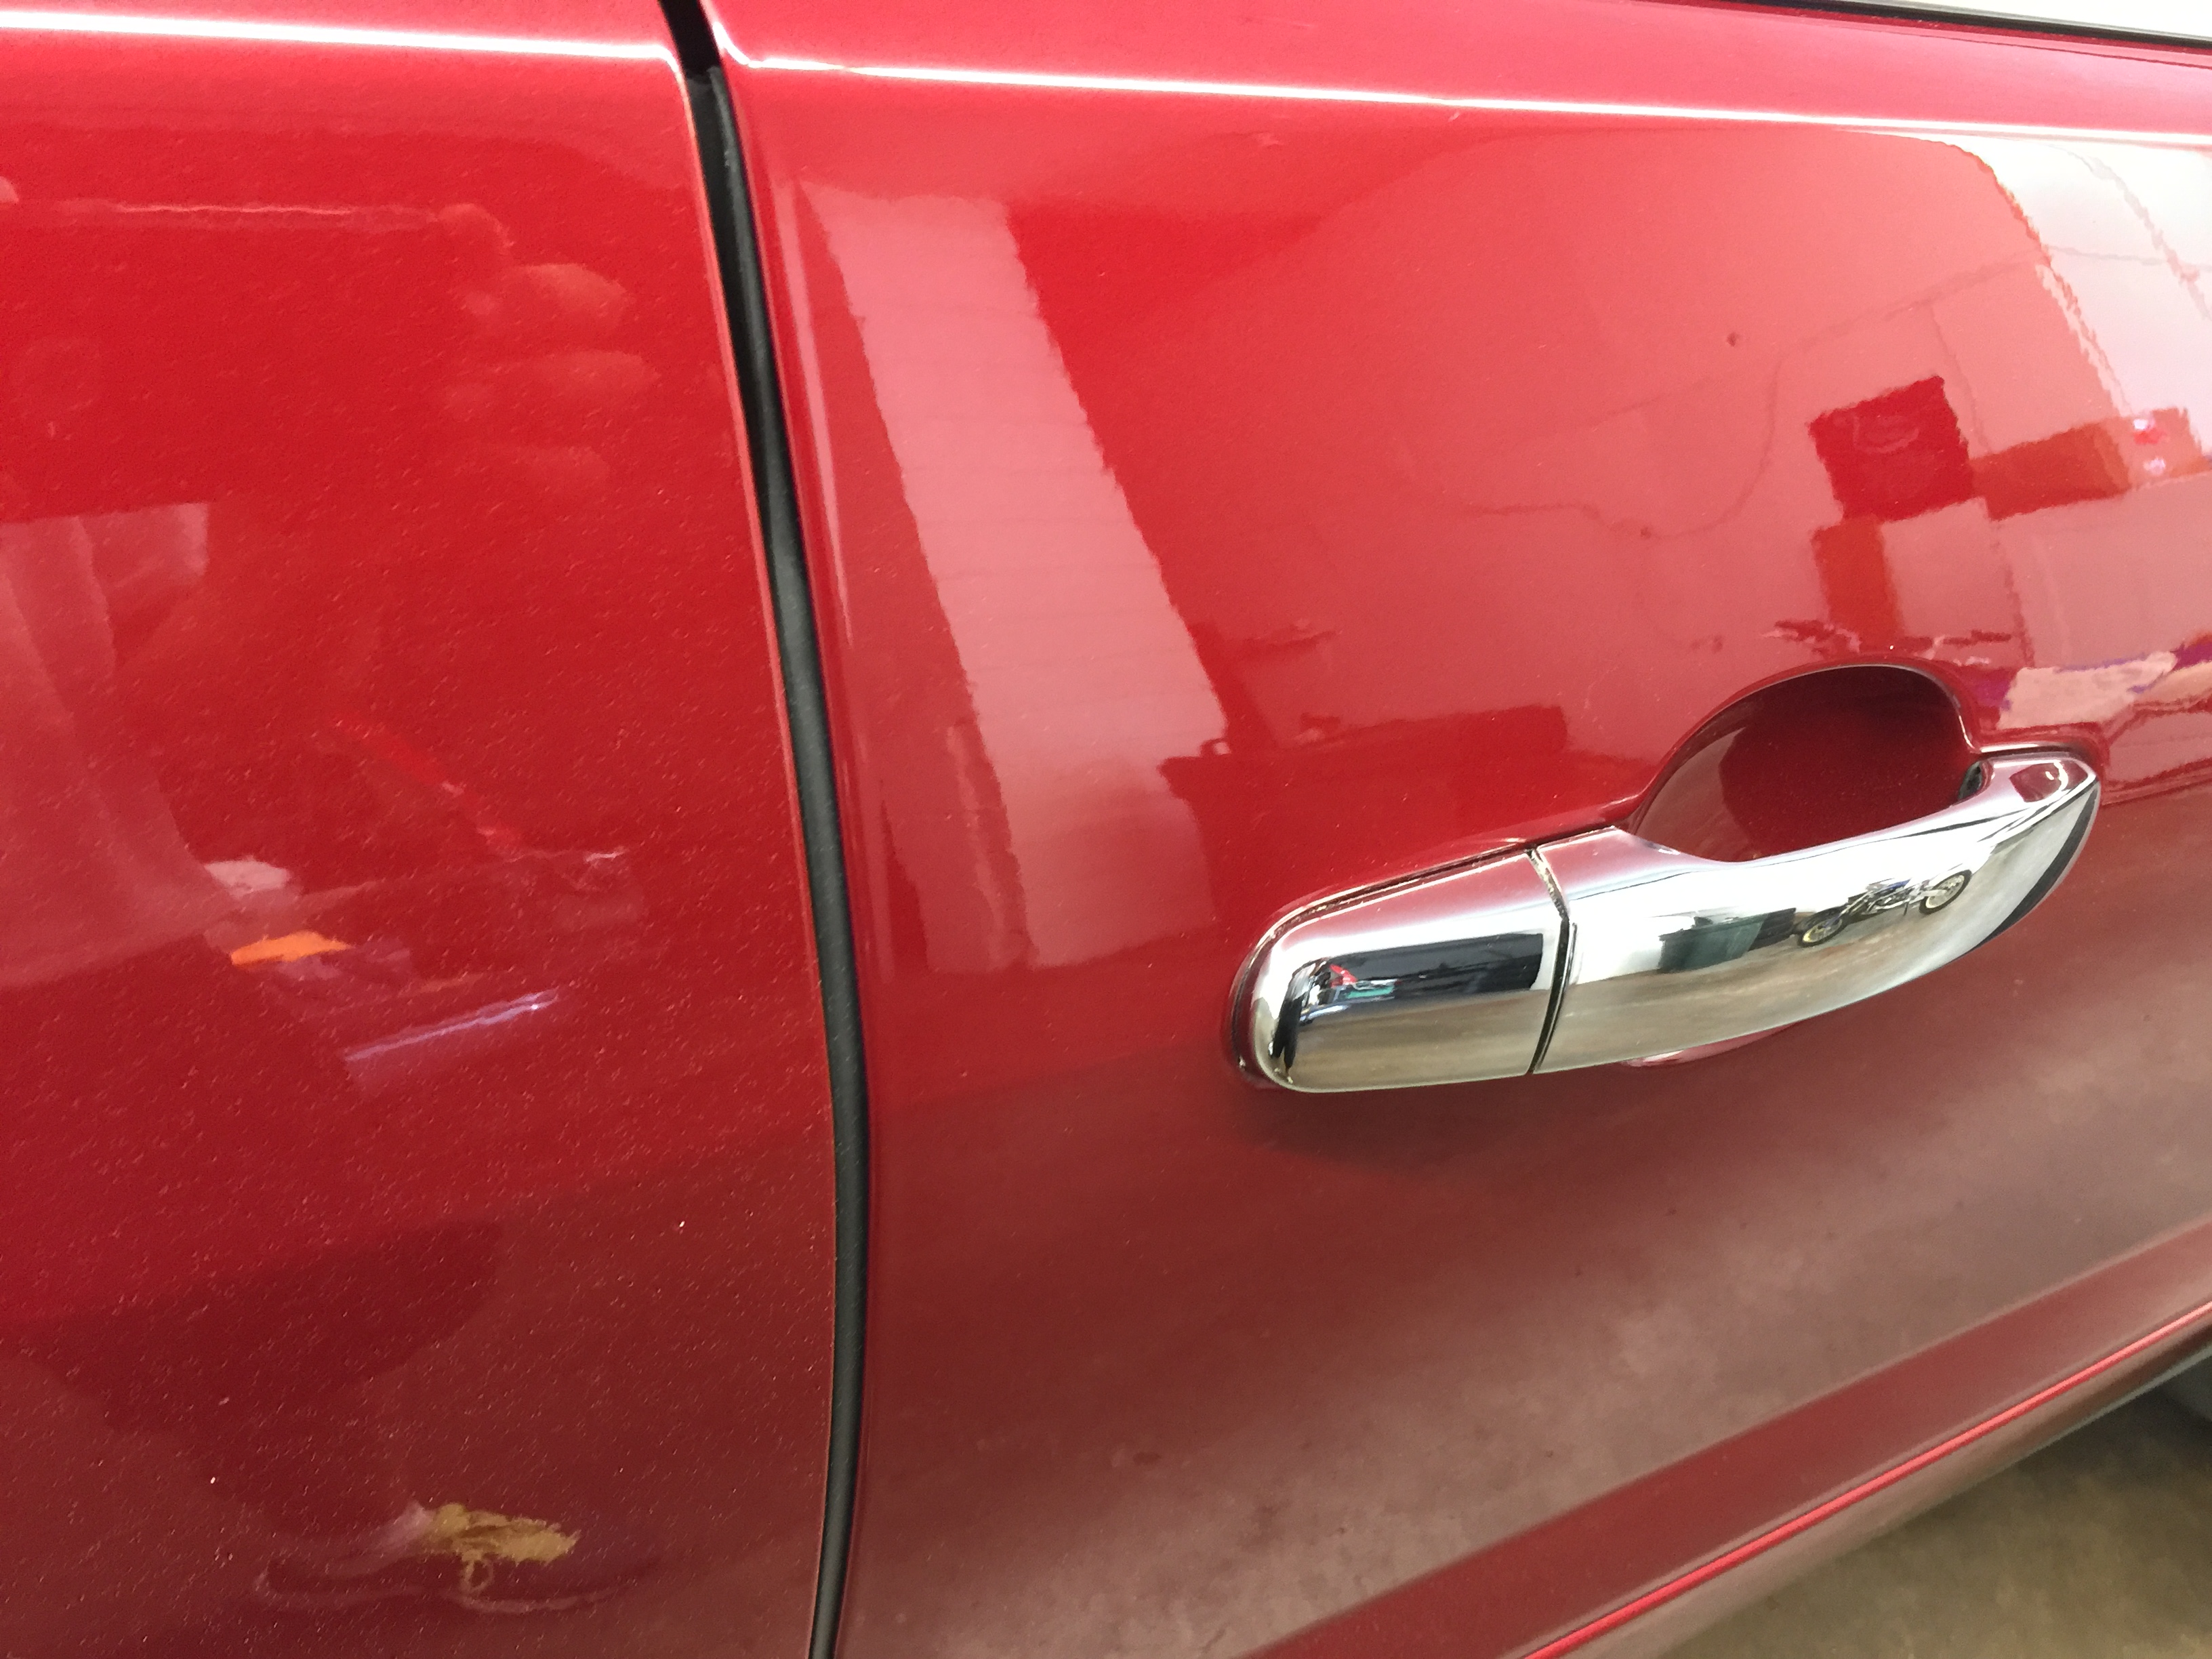 2012 Traverse Dent Removal in Springfield, IL, Paintless Dent Removal, Ding Repair, Traverse passenger Door, http://217dent.com